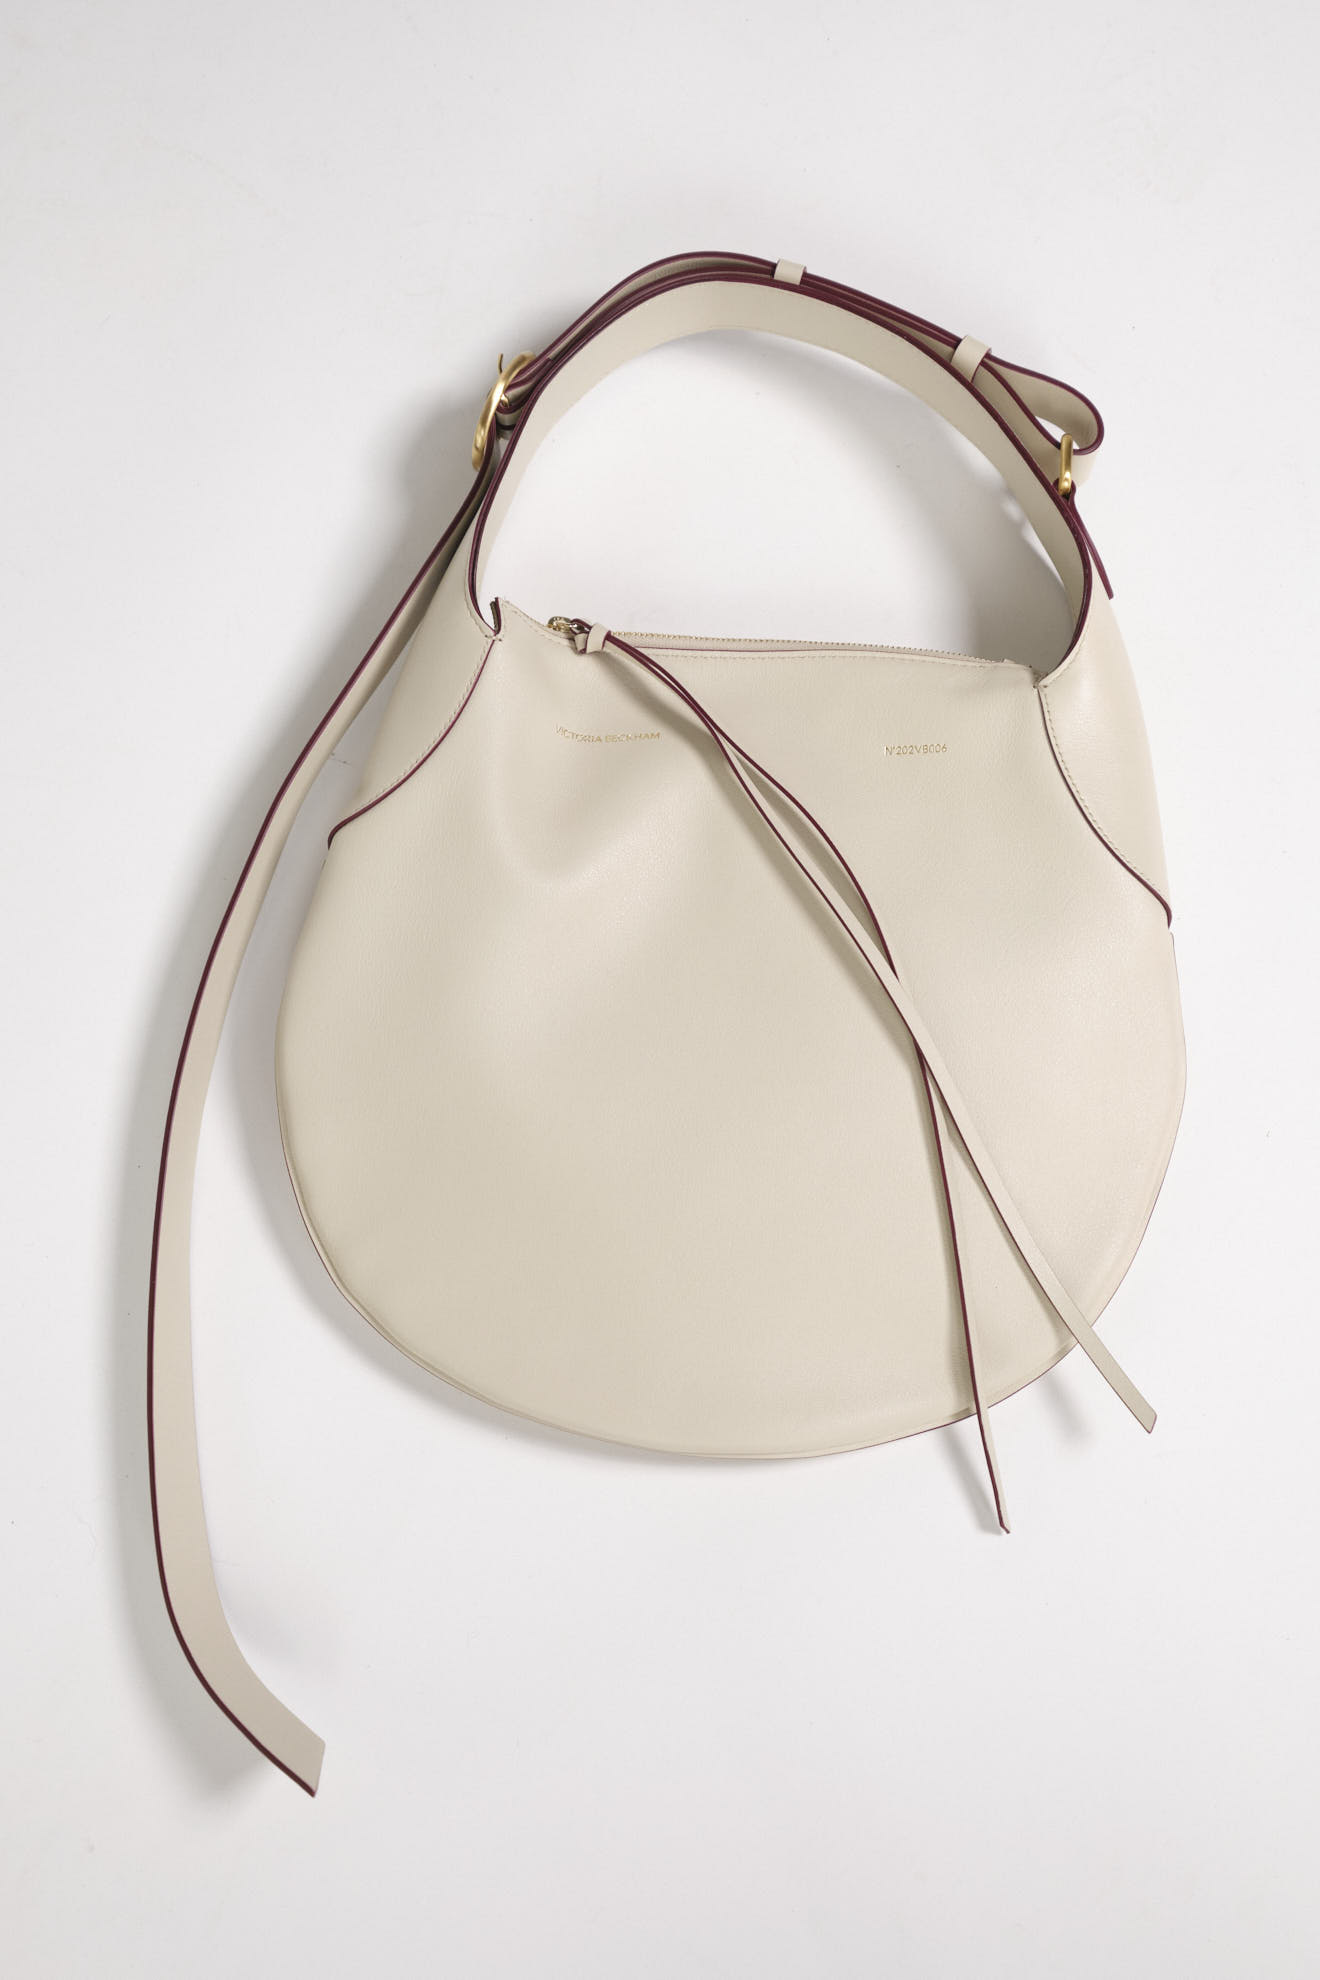 Victoria Beckham Small Hobo Moon white One Size